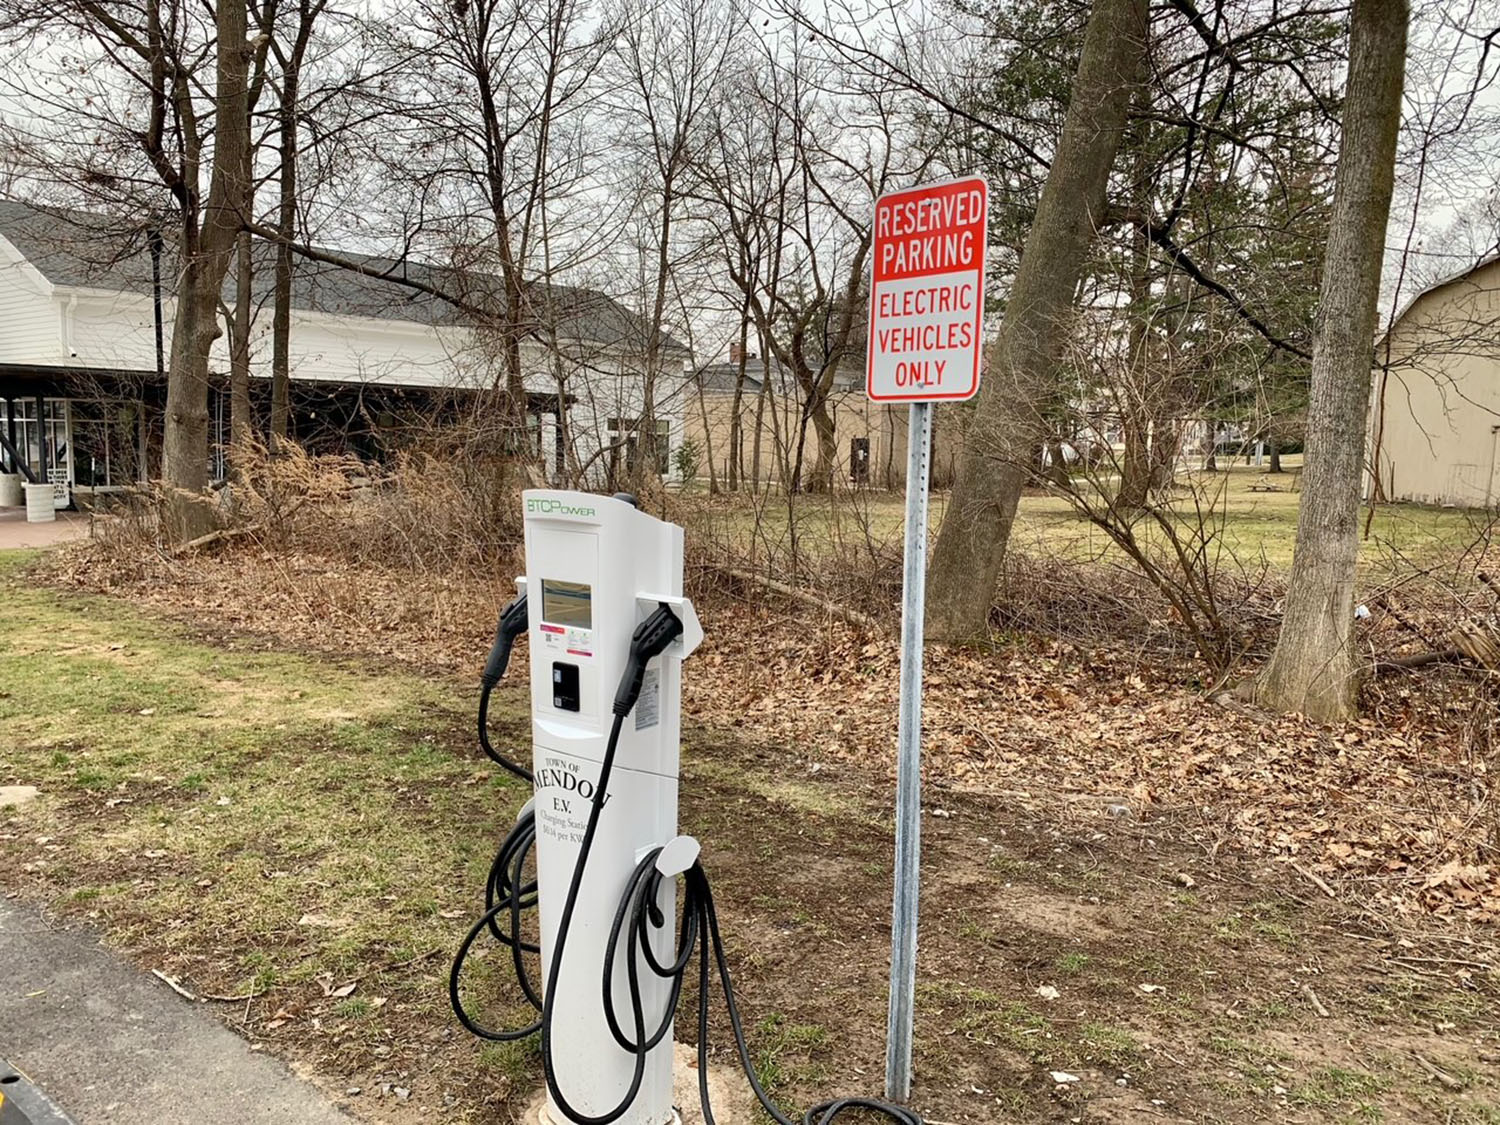 Mendon Public Library has two electric vehicle charging stations